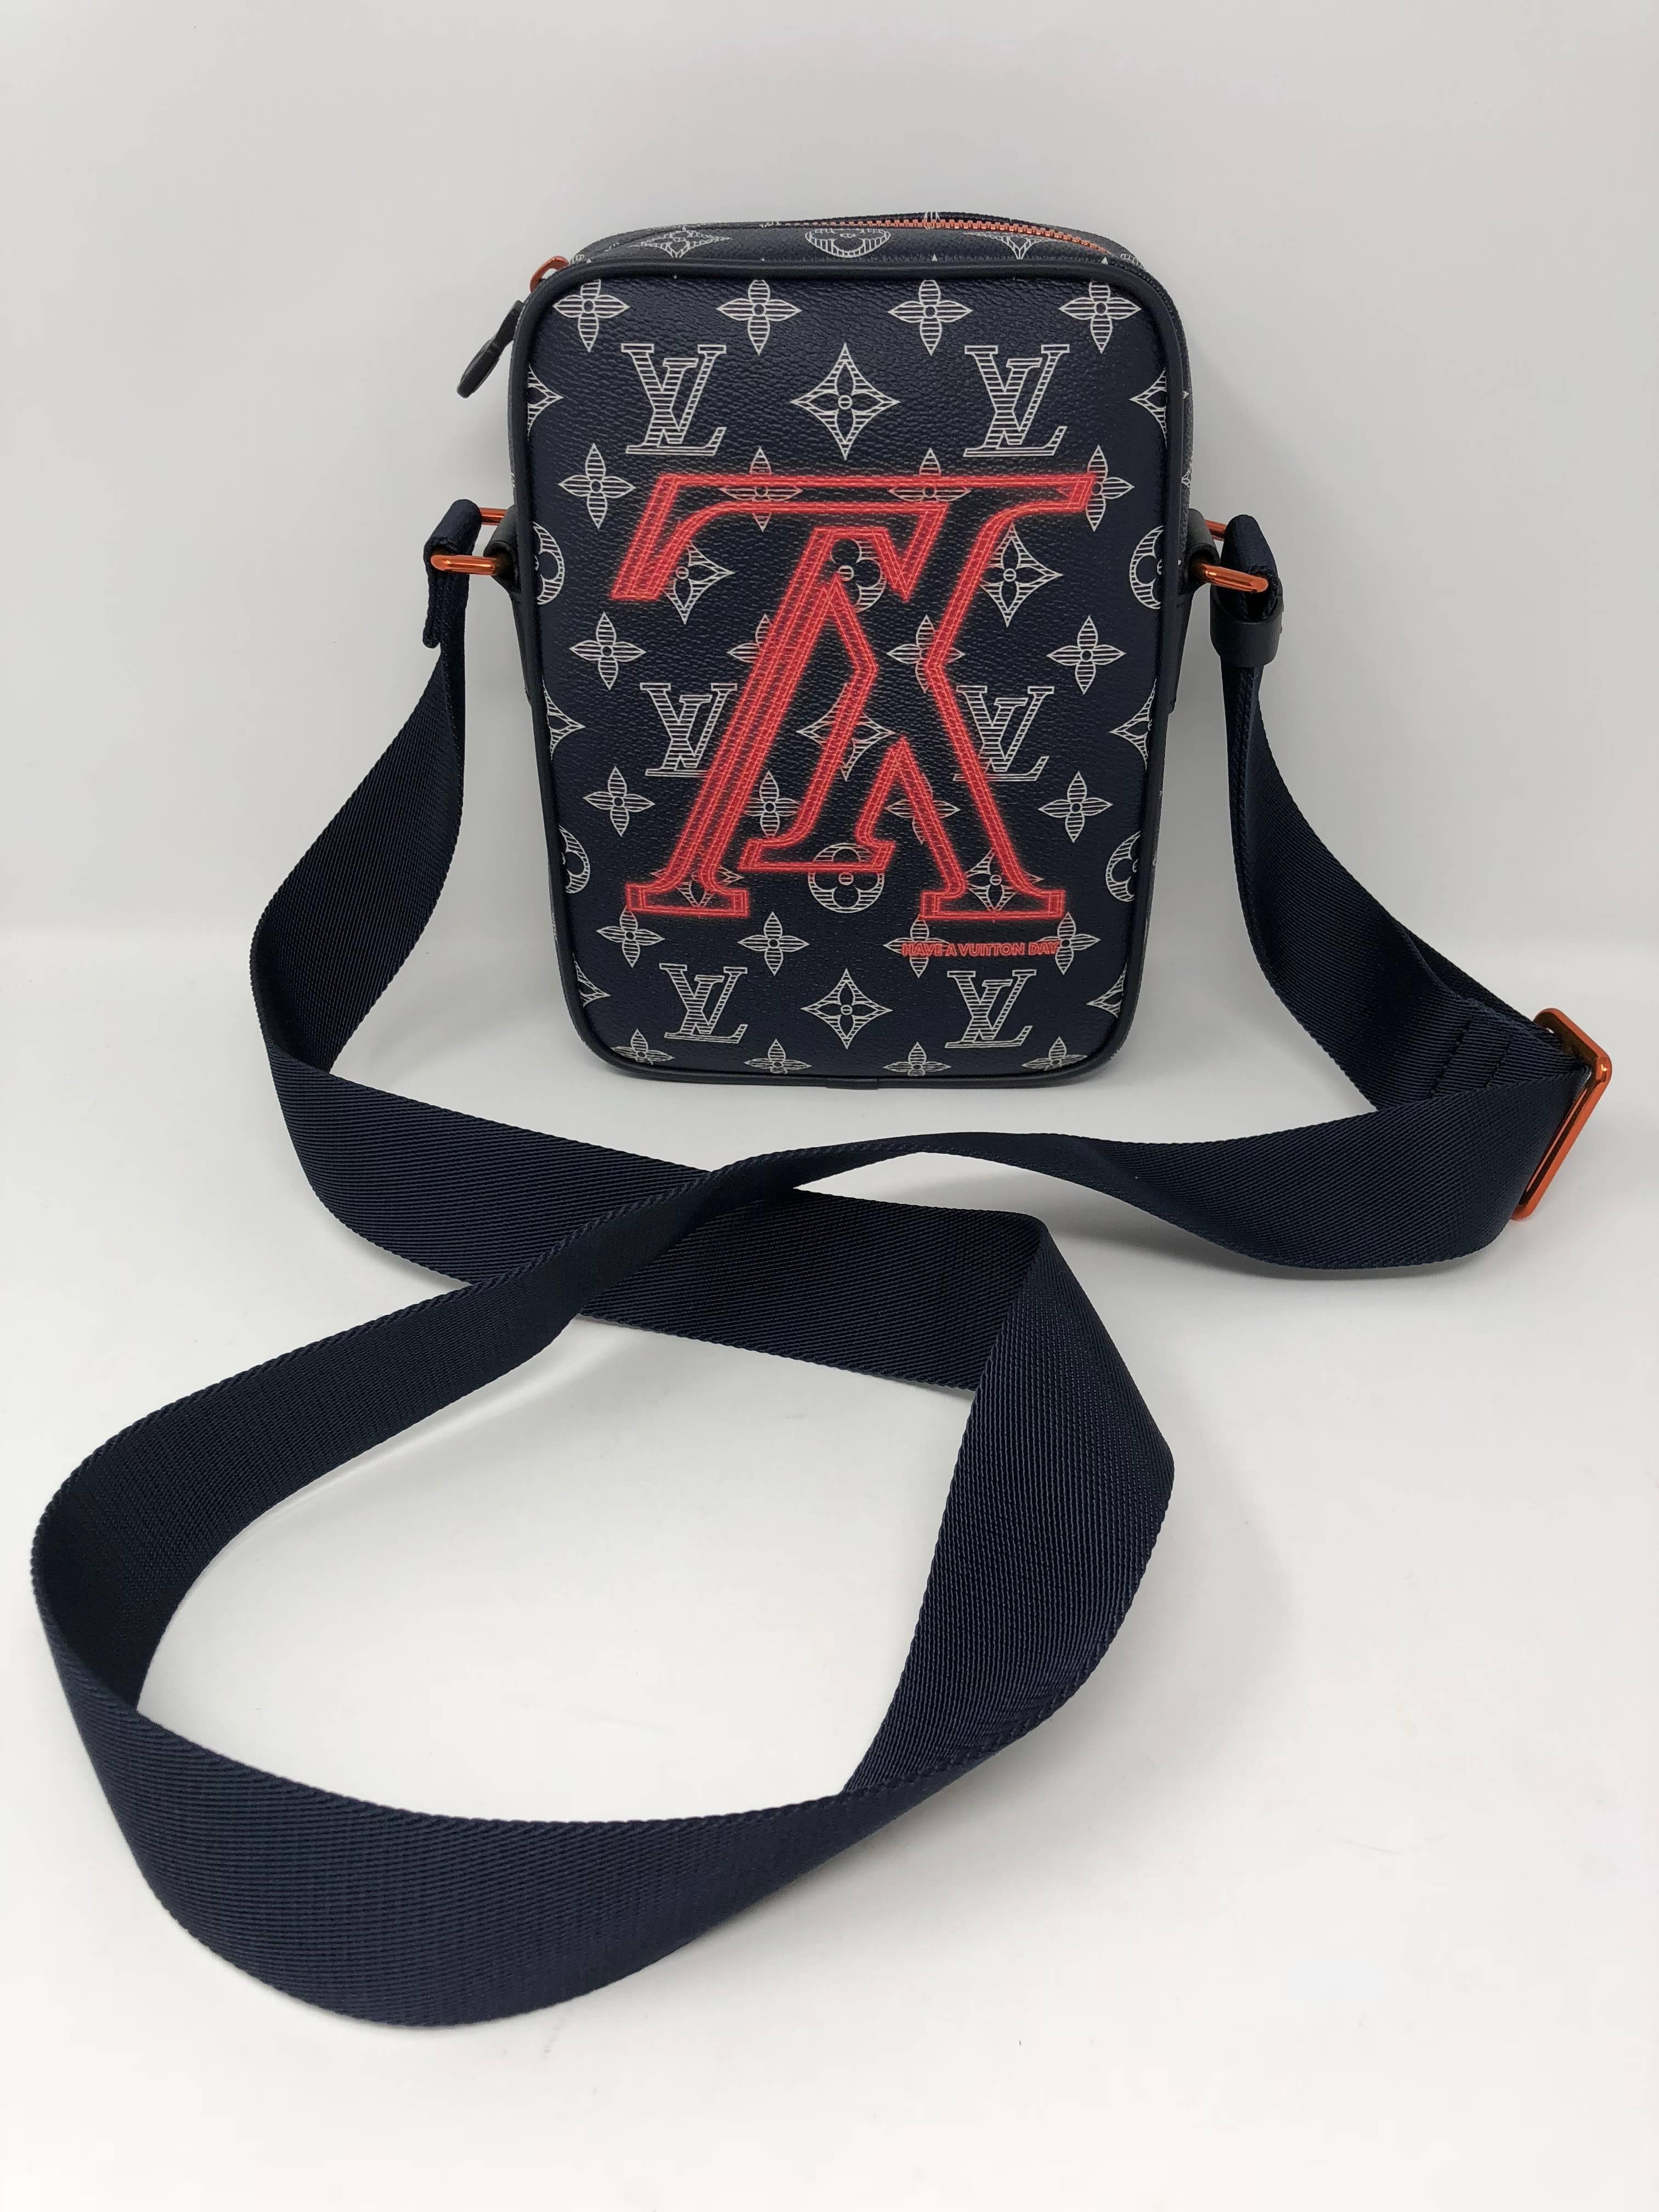 Louis Vuitton Crossbody called the Danube City Monogram Upside Down Ink is brand new with box and dust cover. The adjustable strap makes it short enough for over the shoulder or across the body. The navy monogram called ink is highlighted with coral